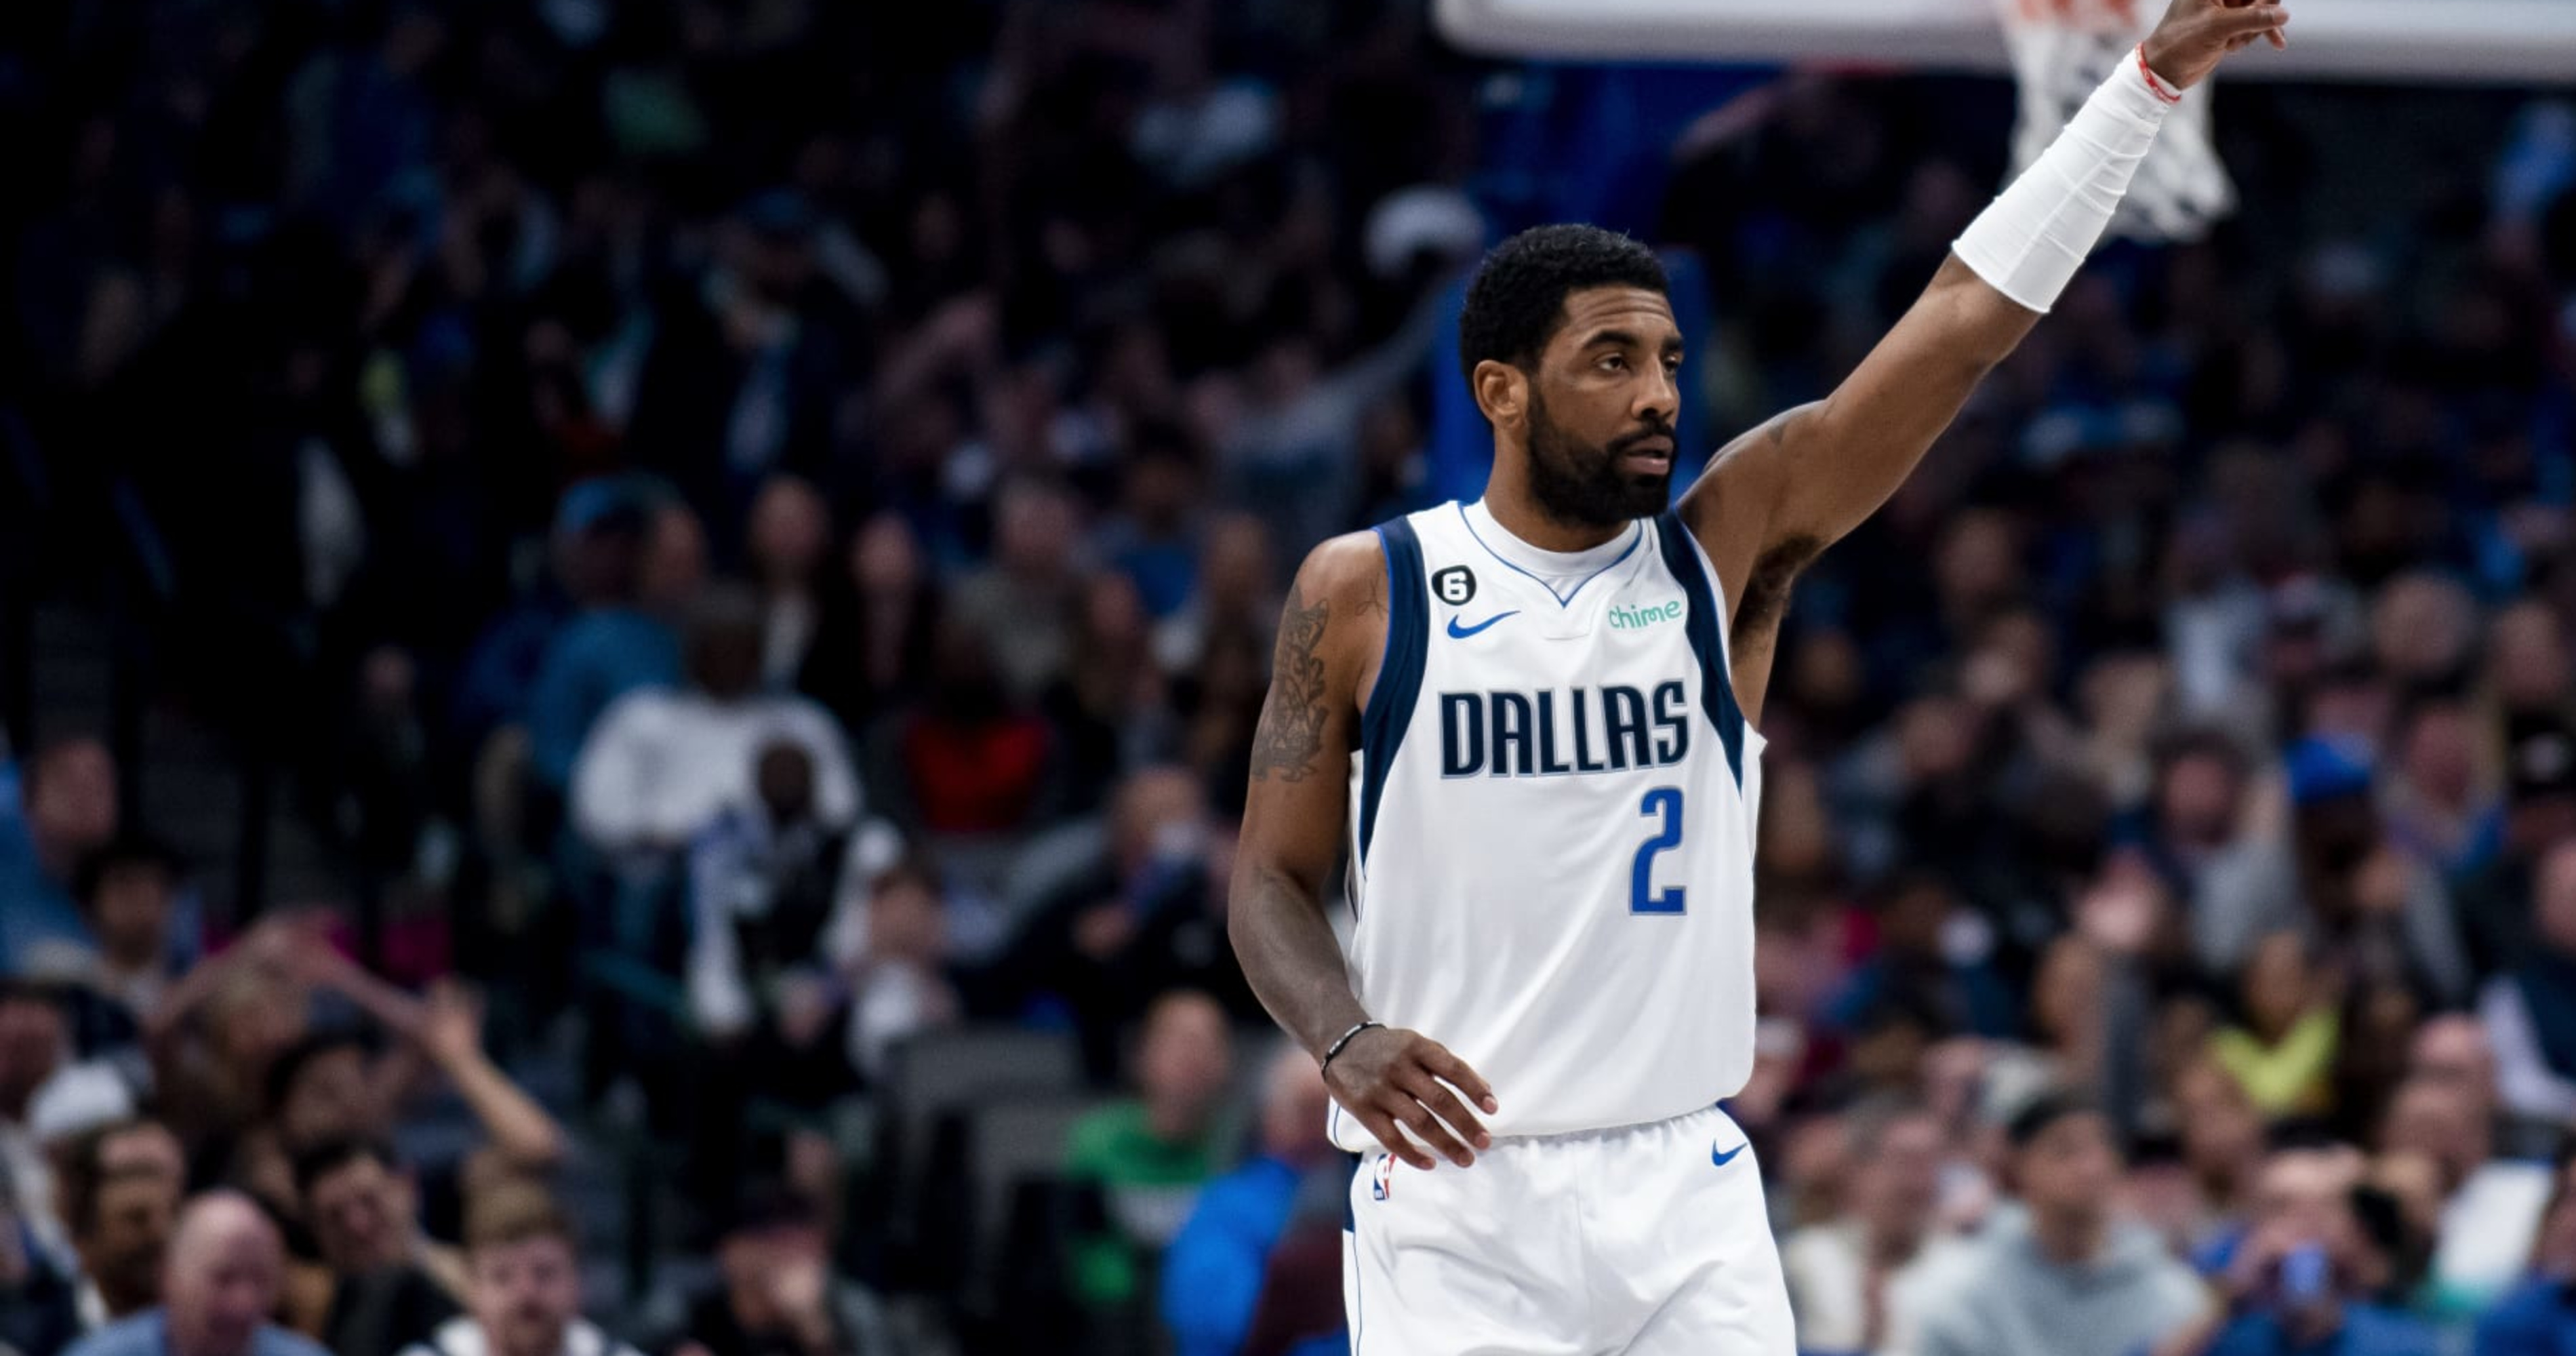 NBA Fans Go Crazy As Kyrie Irving Is Traded To The Dallas Mavericks